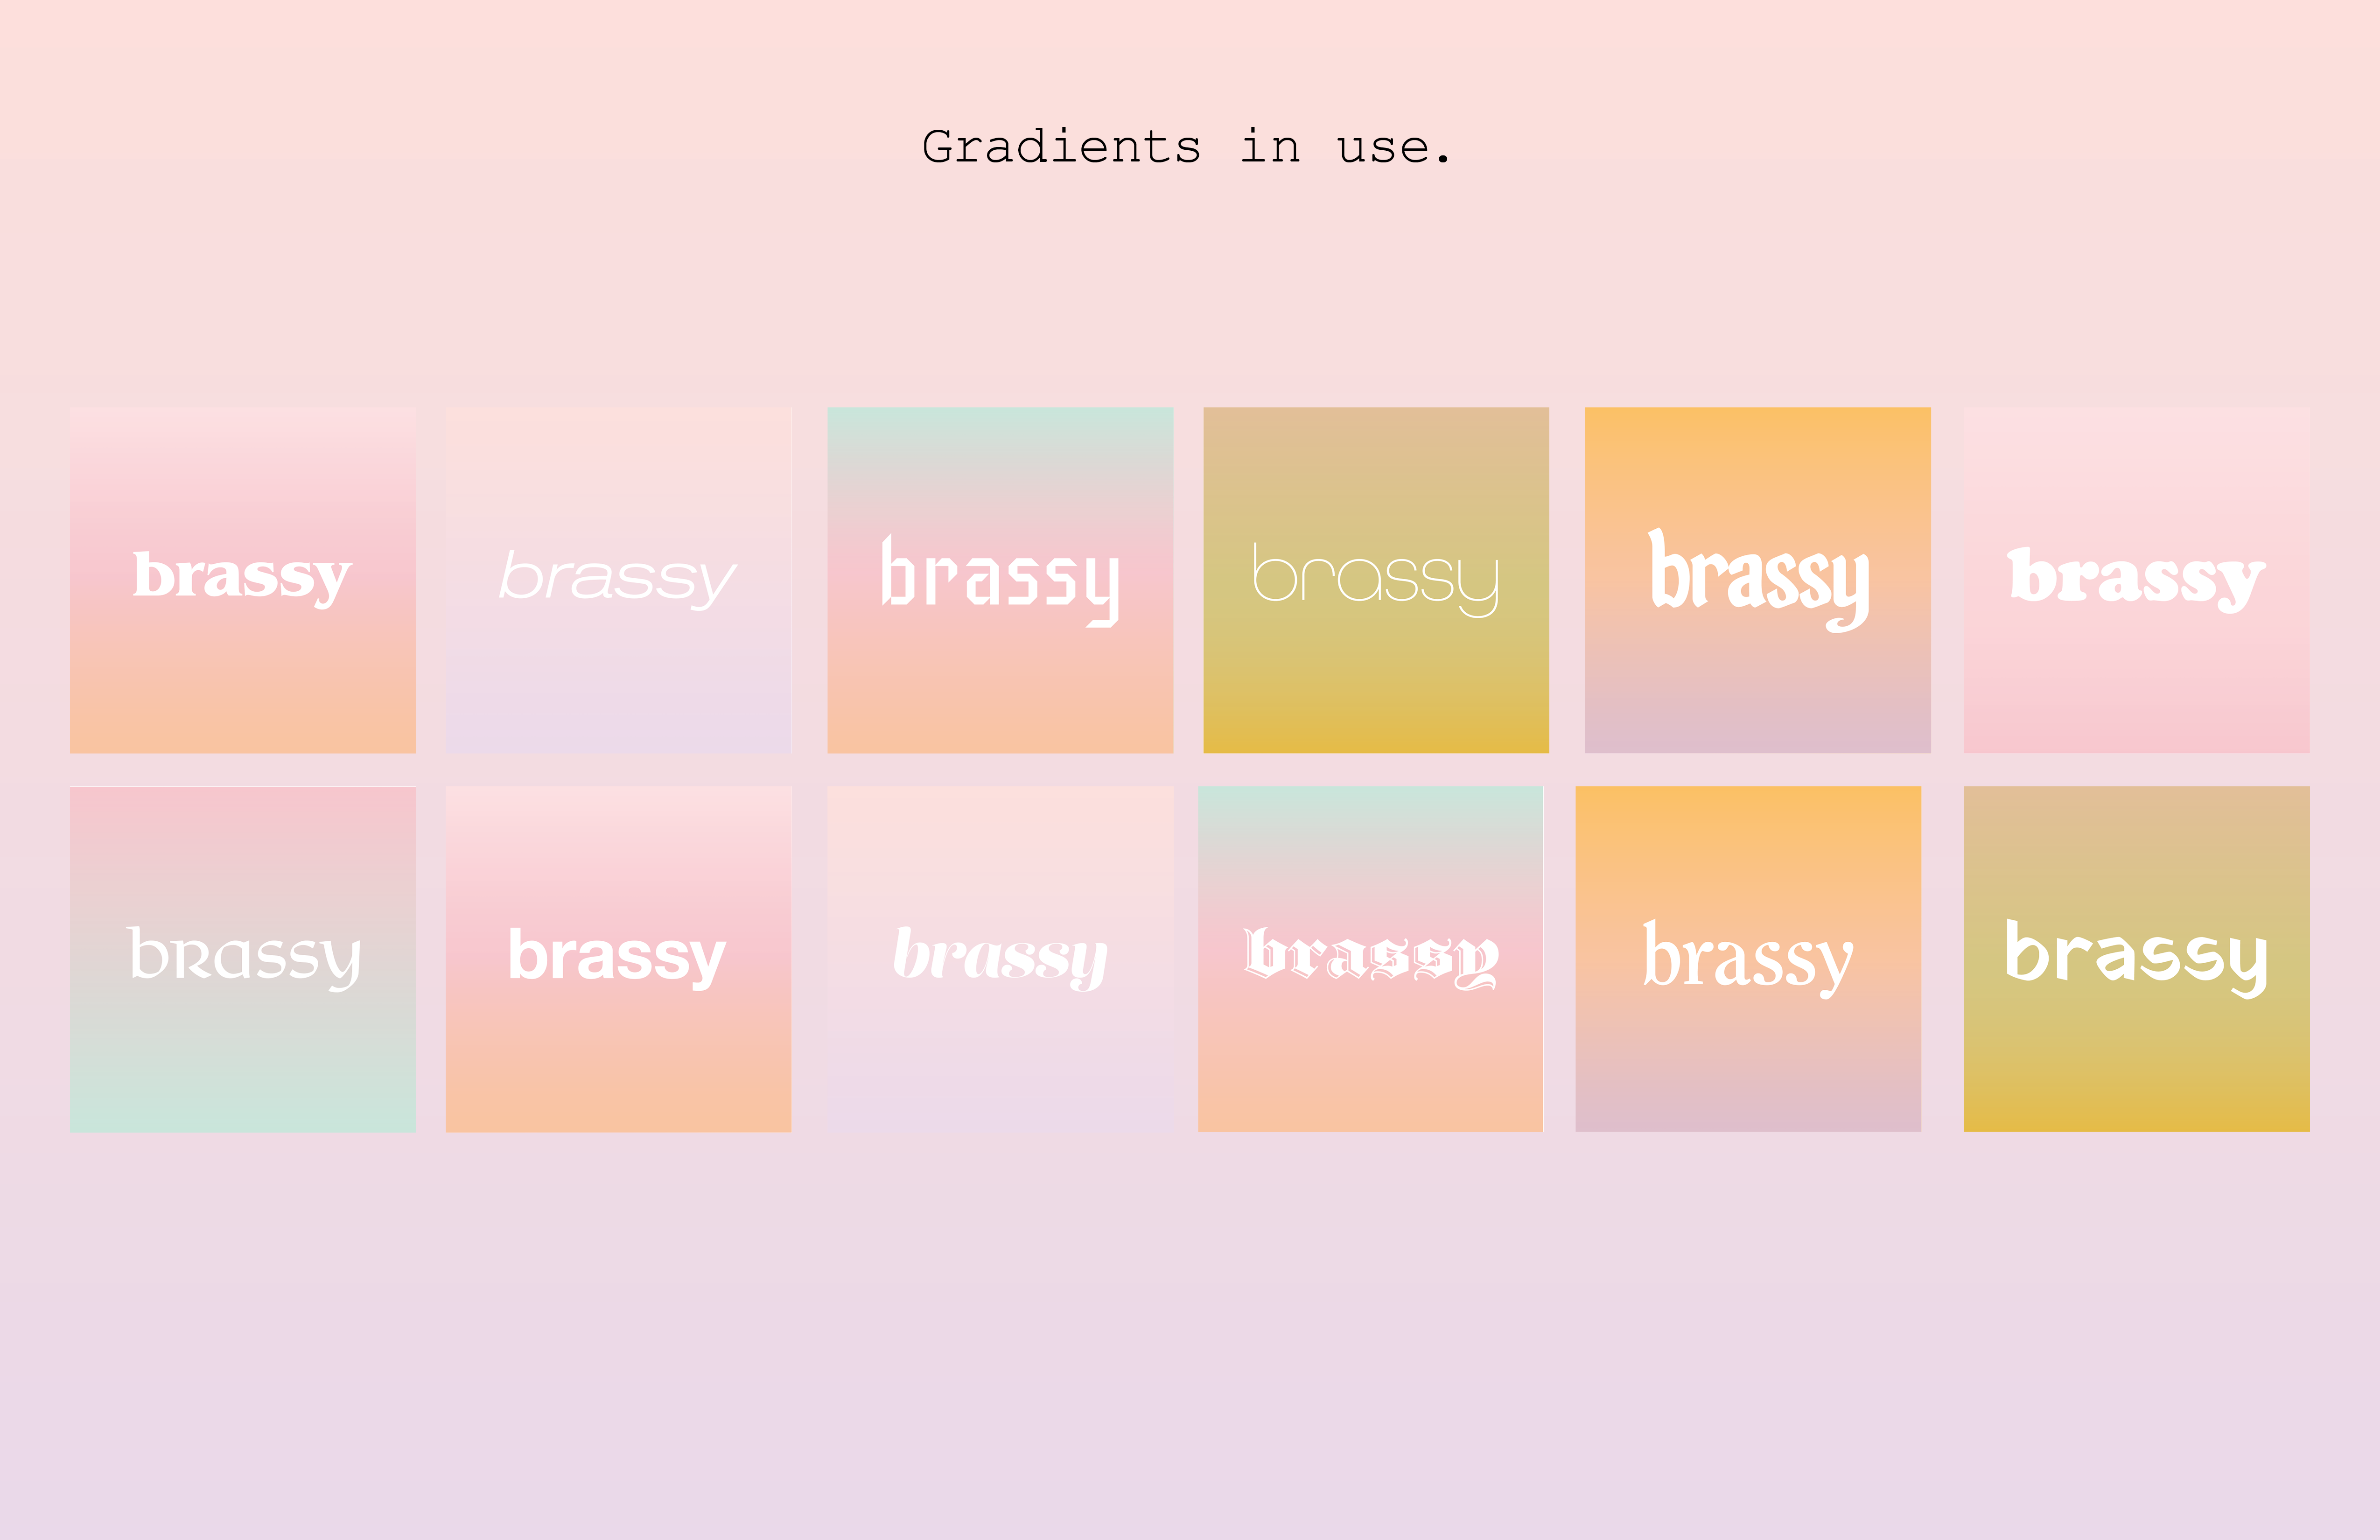 brassy graphic identity-gradients in use